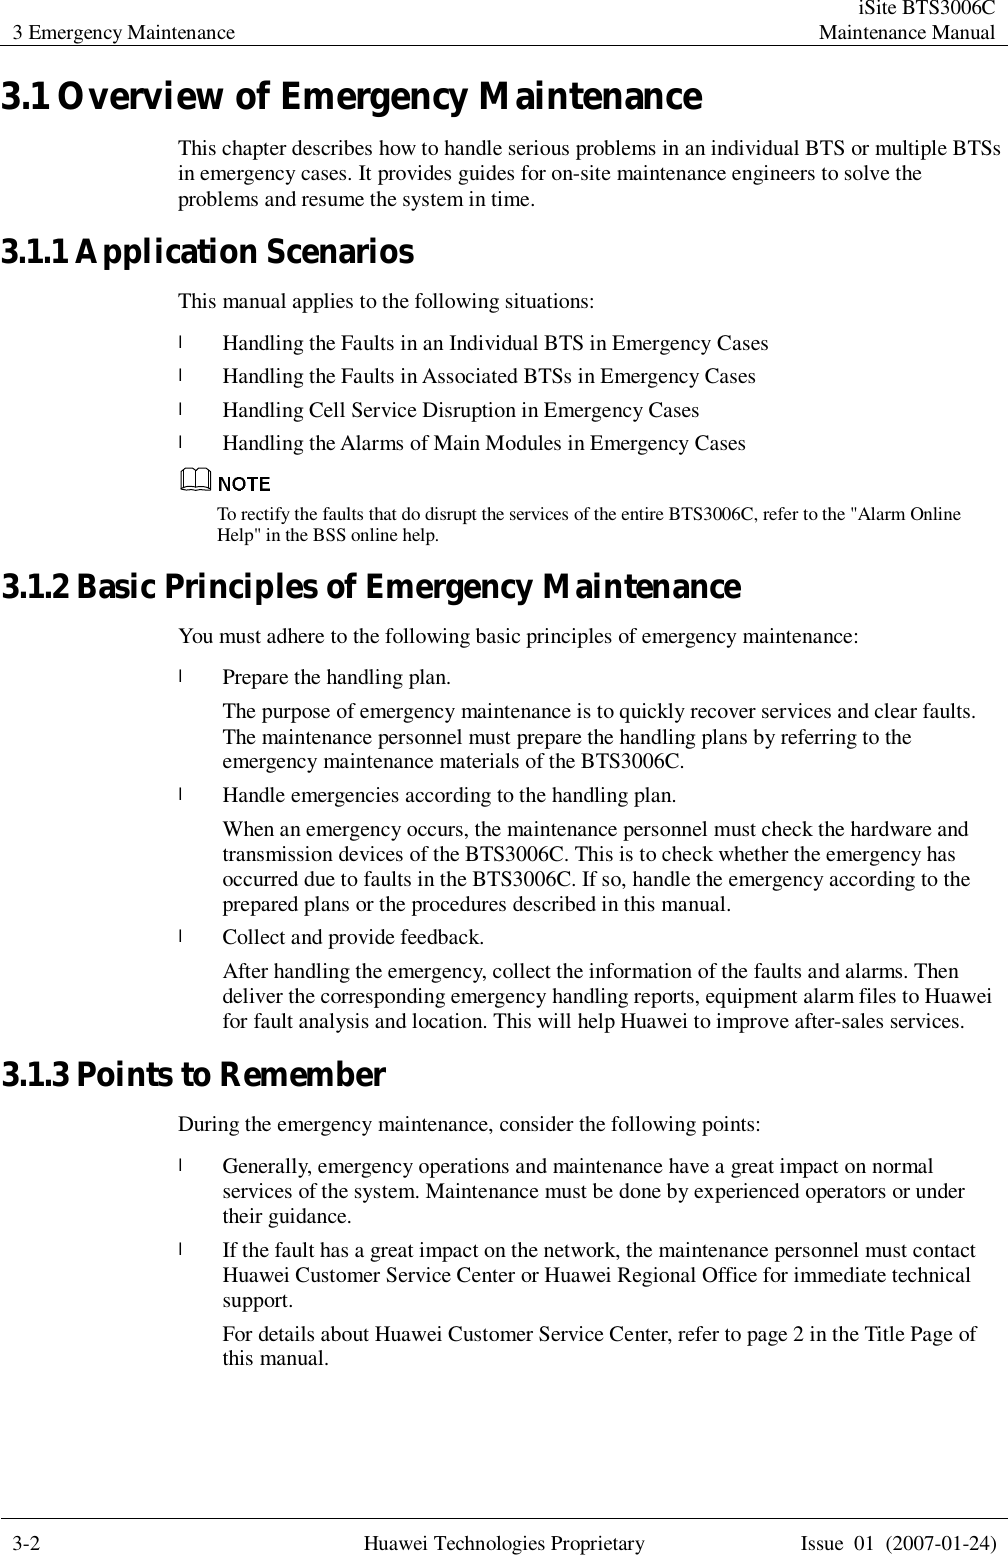 3 Emergency Maintenance  iSite BTS3006C Maintenance Manual  3-2 Huawei Technologies Proprietary Issue 01 (2007-01-24)  3.1 Overview of Emergency Maintenance This chapter describes how to handle serious problems in an individual BTS or multiple BTSs in emergency cases. It provides guides for on-site maintenance engineers to solve the problems and resume the system in time. 3.1.1 Application Scenarios This manual applies to the following situations:  l Handling the Faults in an Individual BTS in Emergency Cases l Handling the Faults in Associated BTSs in Emergency Cases l Handling Cell Service Disruption in Emergency Cases l Handling the Alarms of Main Modules in Emergency Cases  To rectify the faults that do disrupt the services of the entire BTS3006C, refer to the &quot;Alarm Online Help&quot; in the BSS online help. 3.1.2 Basic Principles of Emergency Maintenance You must adhere to the following basic principles of emergency maintenance:  l Prepare the handling plan. The purpose of emergency maintenance is to quickly recover services and clear faults. The maintenance personnel must prepare the handling plans by referring to the emergency maintenance materials of the BTS3006C.  l Handle emergencies according to the handling plan. When an emergency occurs, the maintenance personnel must check the hardware and transmission devices of the BTS3006C. This is to check whether the emergency has occurred due to faults in the BTS3006C. If so, handle the emergency according to the prepared plans or the procedures described in this manual. l Collect and provide feedback. After handling the emergency, collect the information of the faults and alarms. Then deliver the corresponding emergency handling reports, equipment alarm files to Huawei for fault analysis and location. This will help Huawei to improve after-sales services. 3.1.3 Points to Remember During the emergency maintenance, consider the following points:  l Generally, emergency operations and maintenance have a great impact on normal services of the system. Maintenance must be done by experienced operators or under their guidance. l If the fault has a great impact on the network, the maintenance personnel must contact Huawei Customer Service Center or Huawei Regional Office for immediate technical support.  For details about Huawei Customer Service Center, refer to page 2 in the Title Page of this manual. 